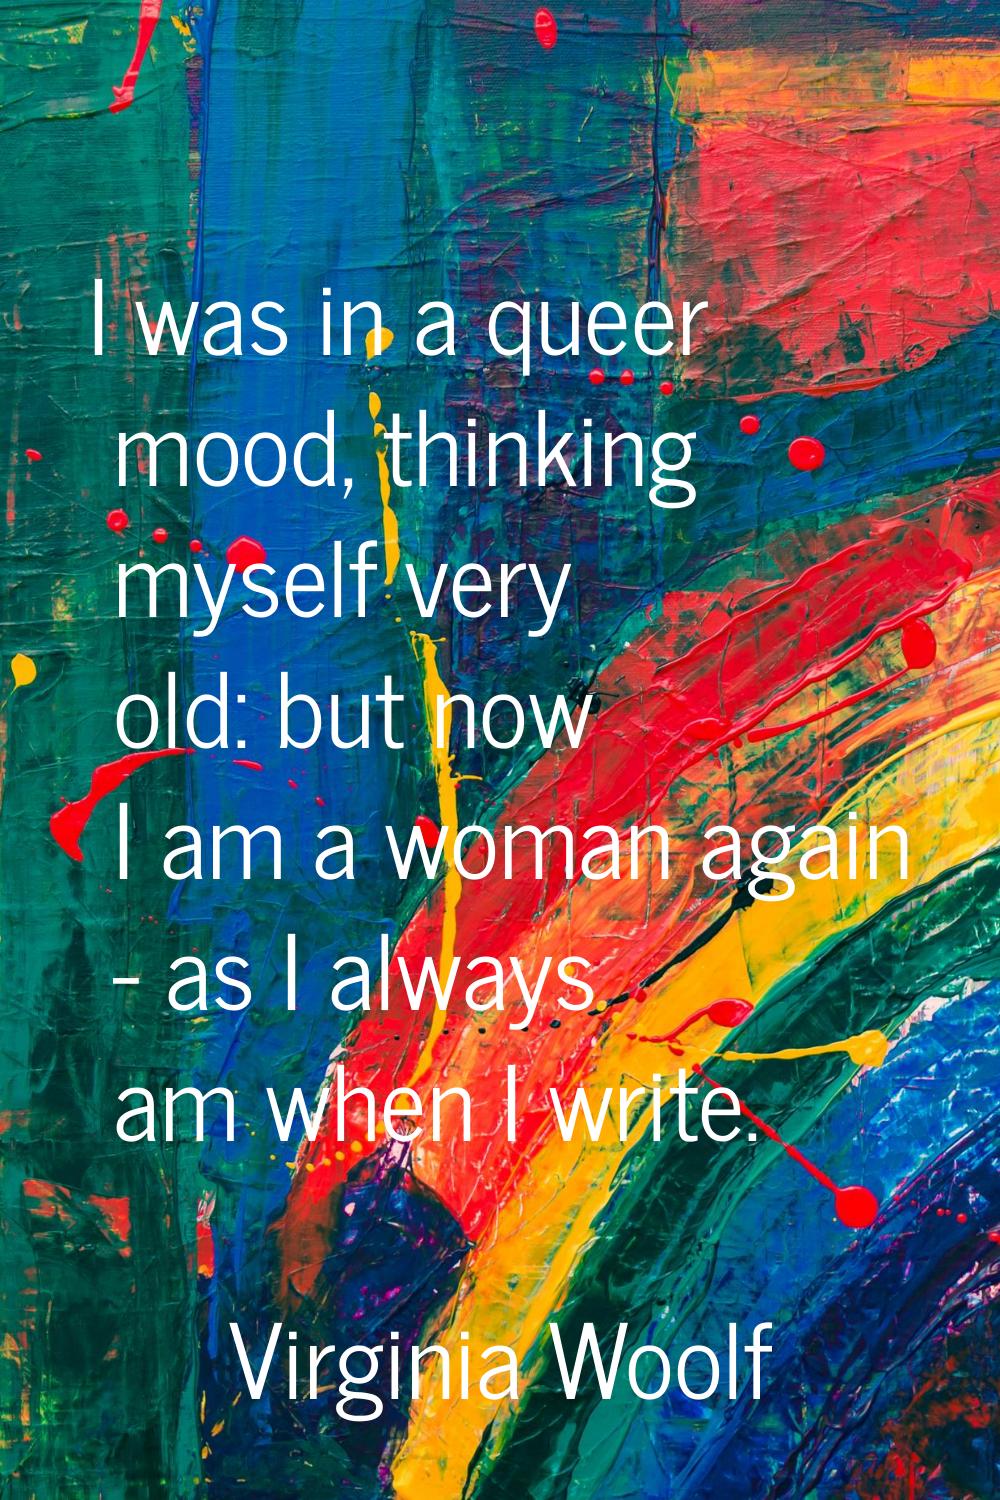 I was in a queer mood, thinking myself very old: but now I am a woman again - as I always am when I